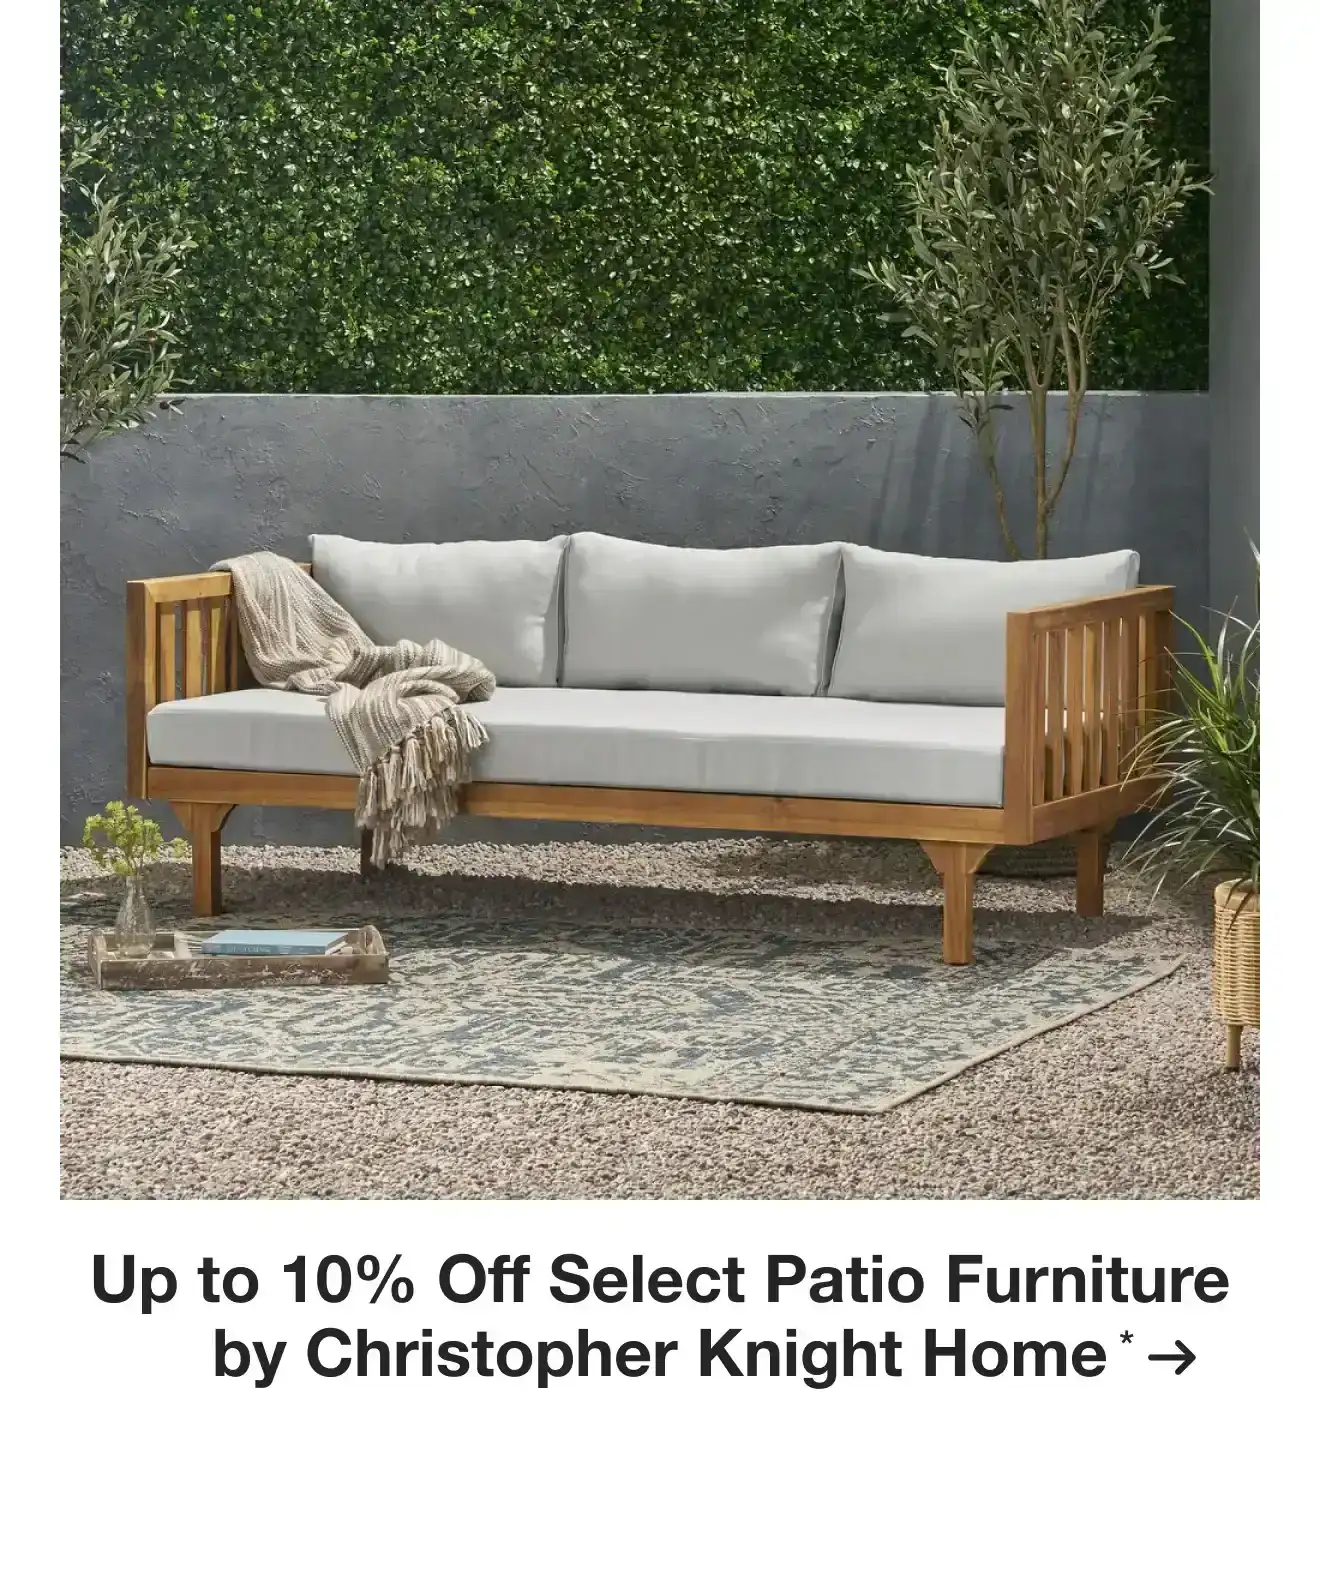 Up to 10% Off Select Patio Furniture by Christopher Knight Home*